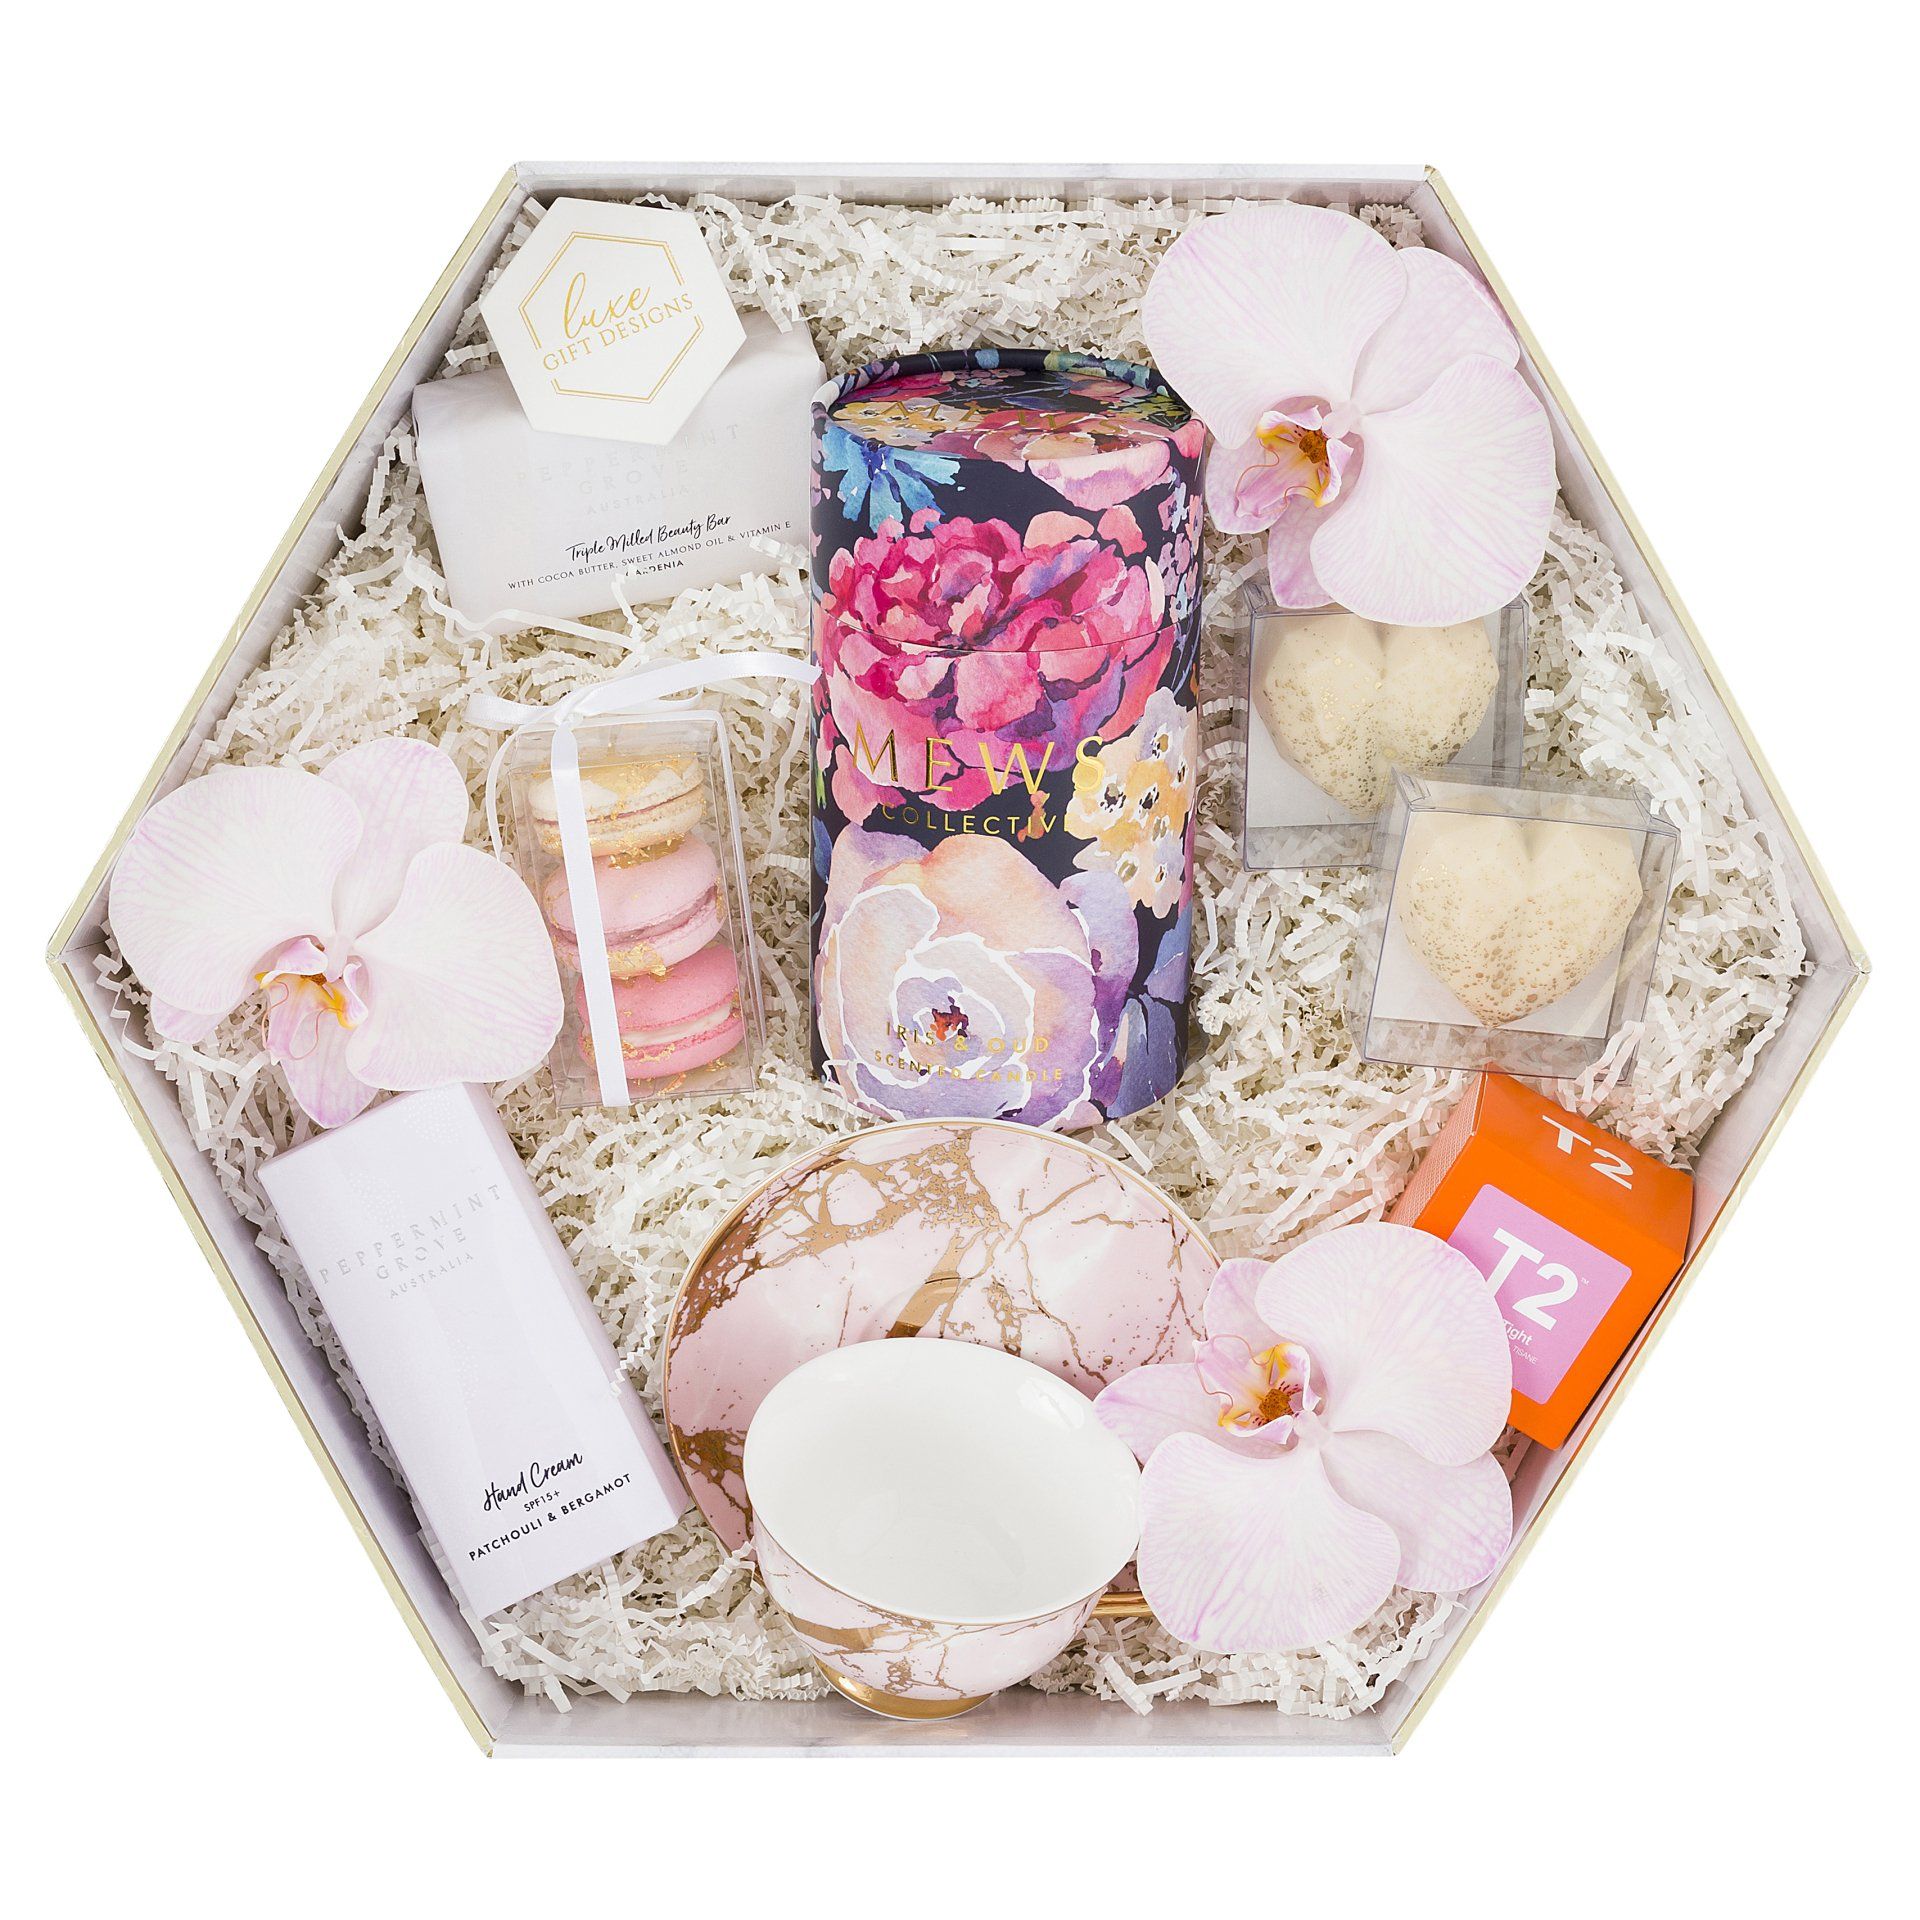 White box with mews collective, hand cream, soap and macaron.